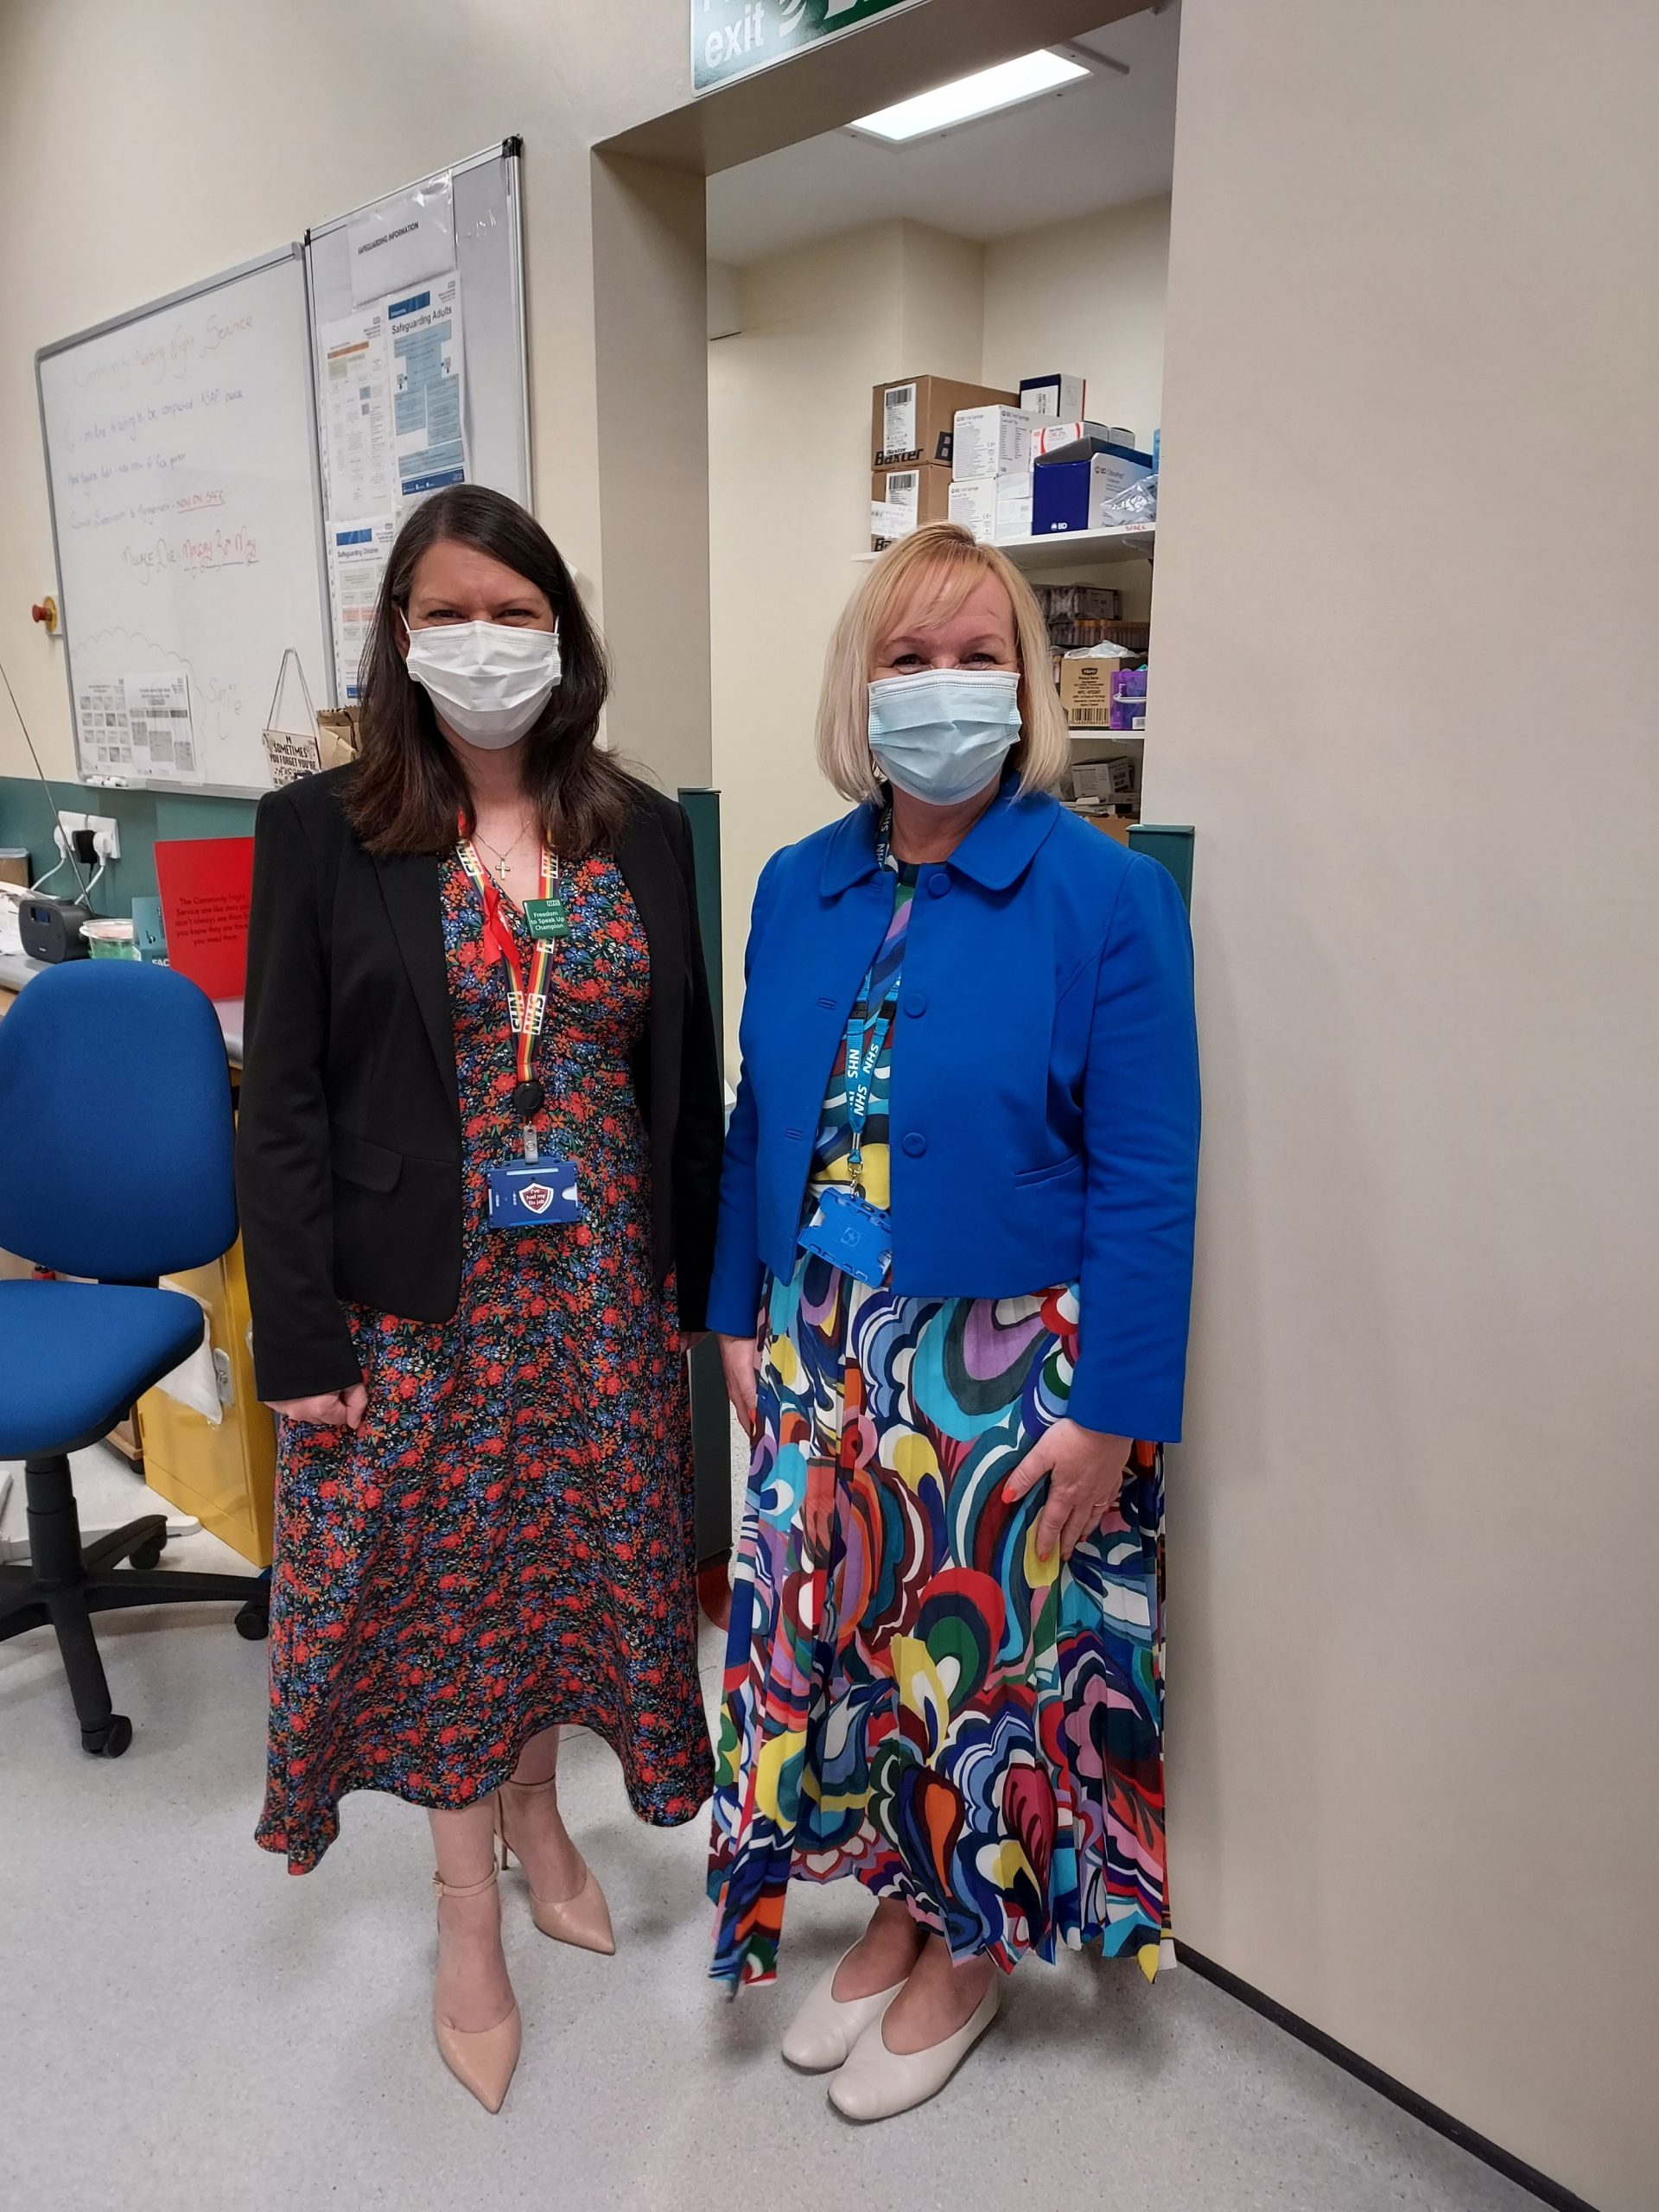 Members of staff wearing face coverings and NHS lanyards